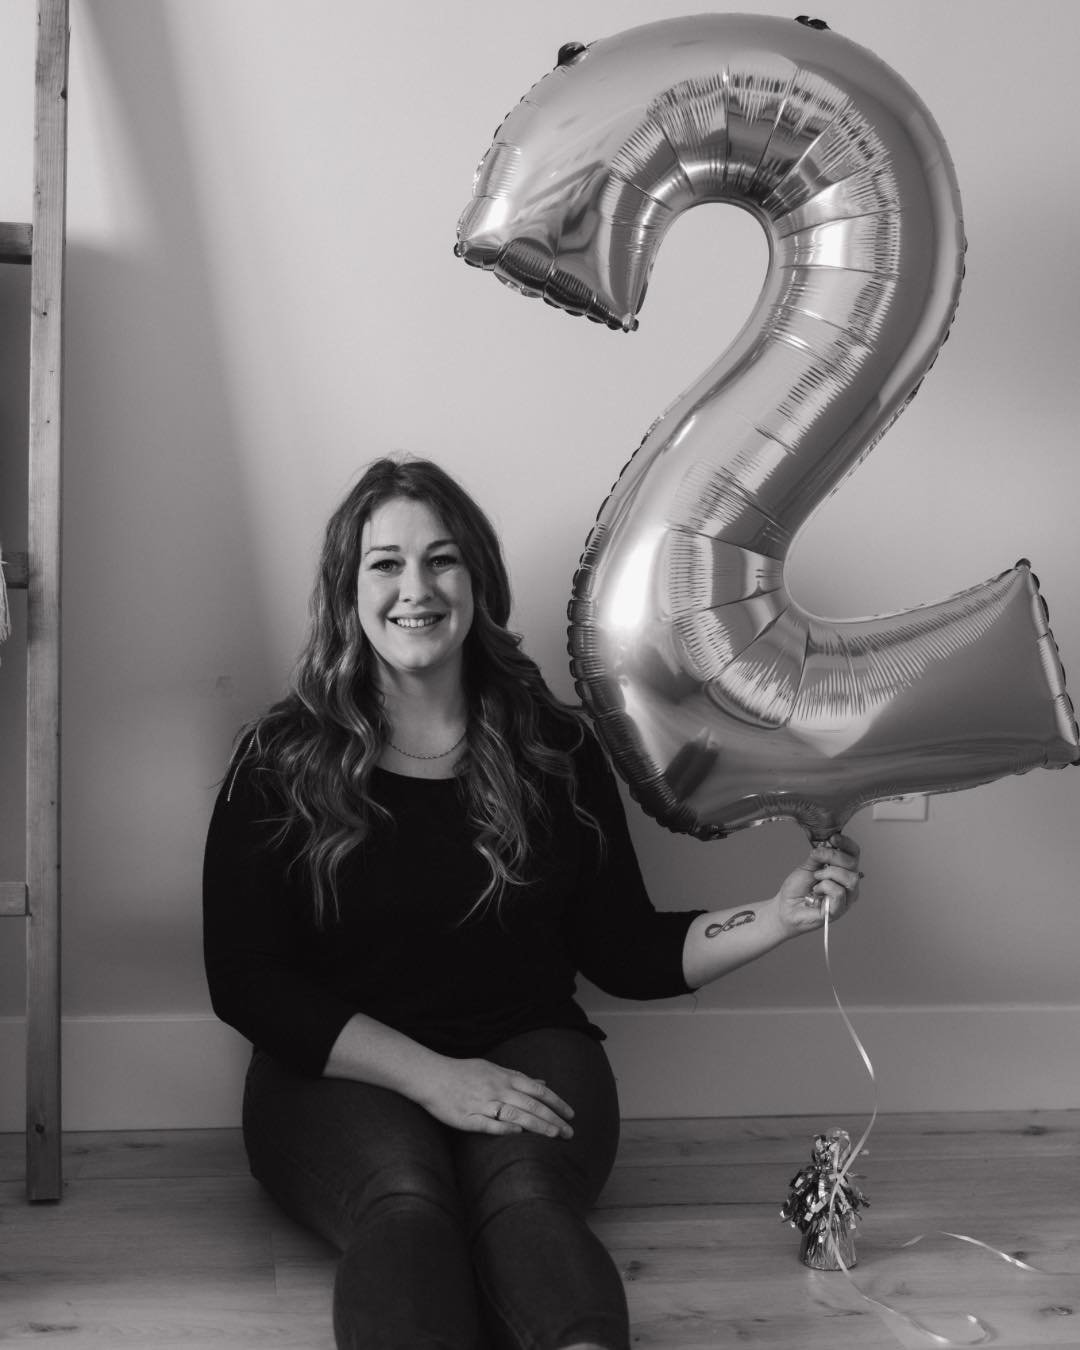 I&rsquo;ve survived 2 years of entrepreneurship! 🥳 

Small Town Marketing Solutions is officially 2 years old today 🫶🏼

From my kitchen table in 2022 to an office in Dartmouth, countless lessons were learned, friendships were made, and I truly do 